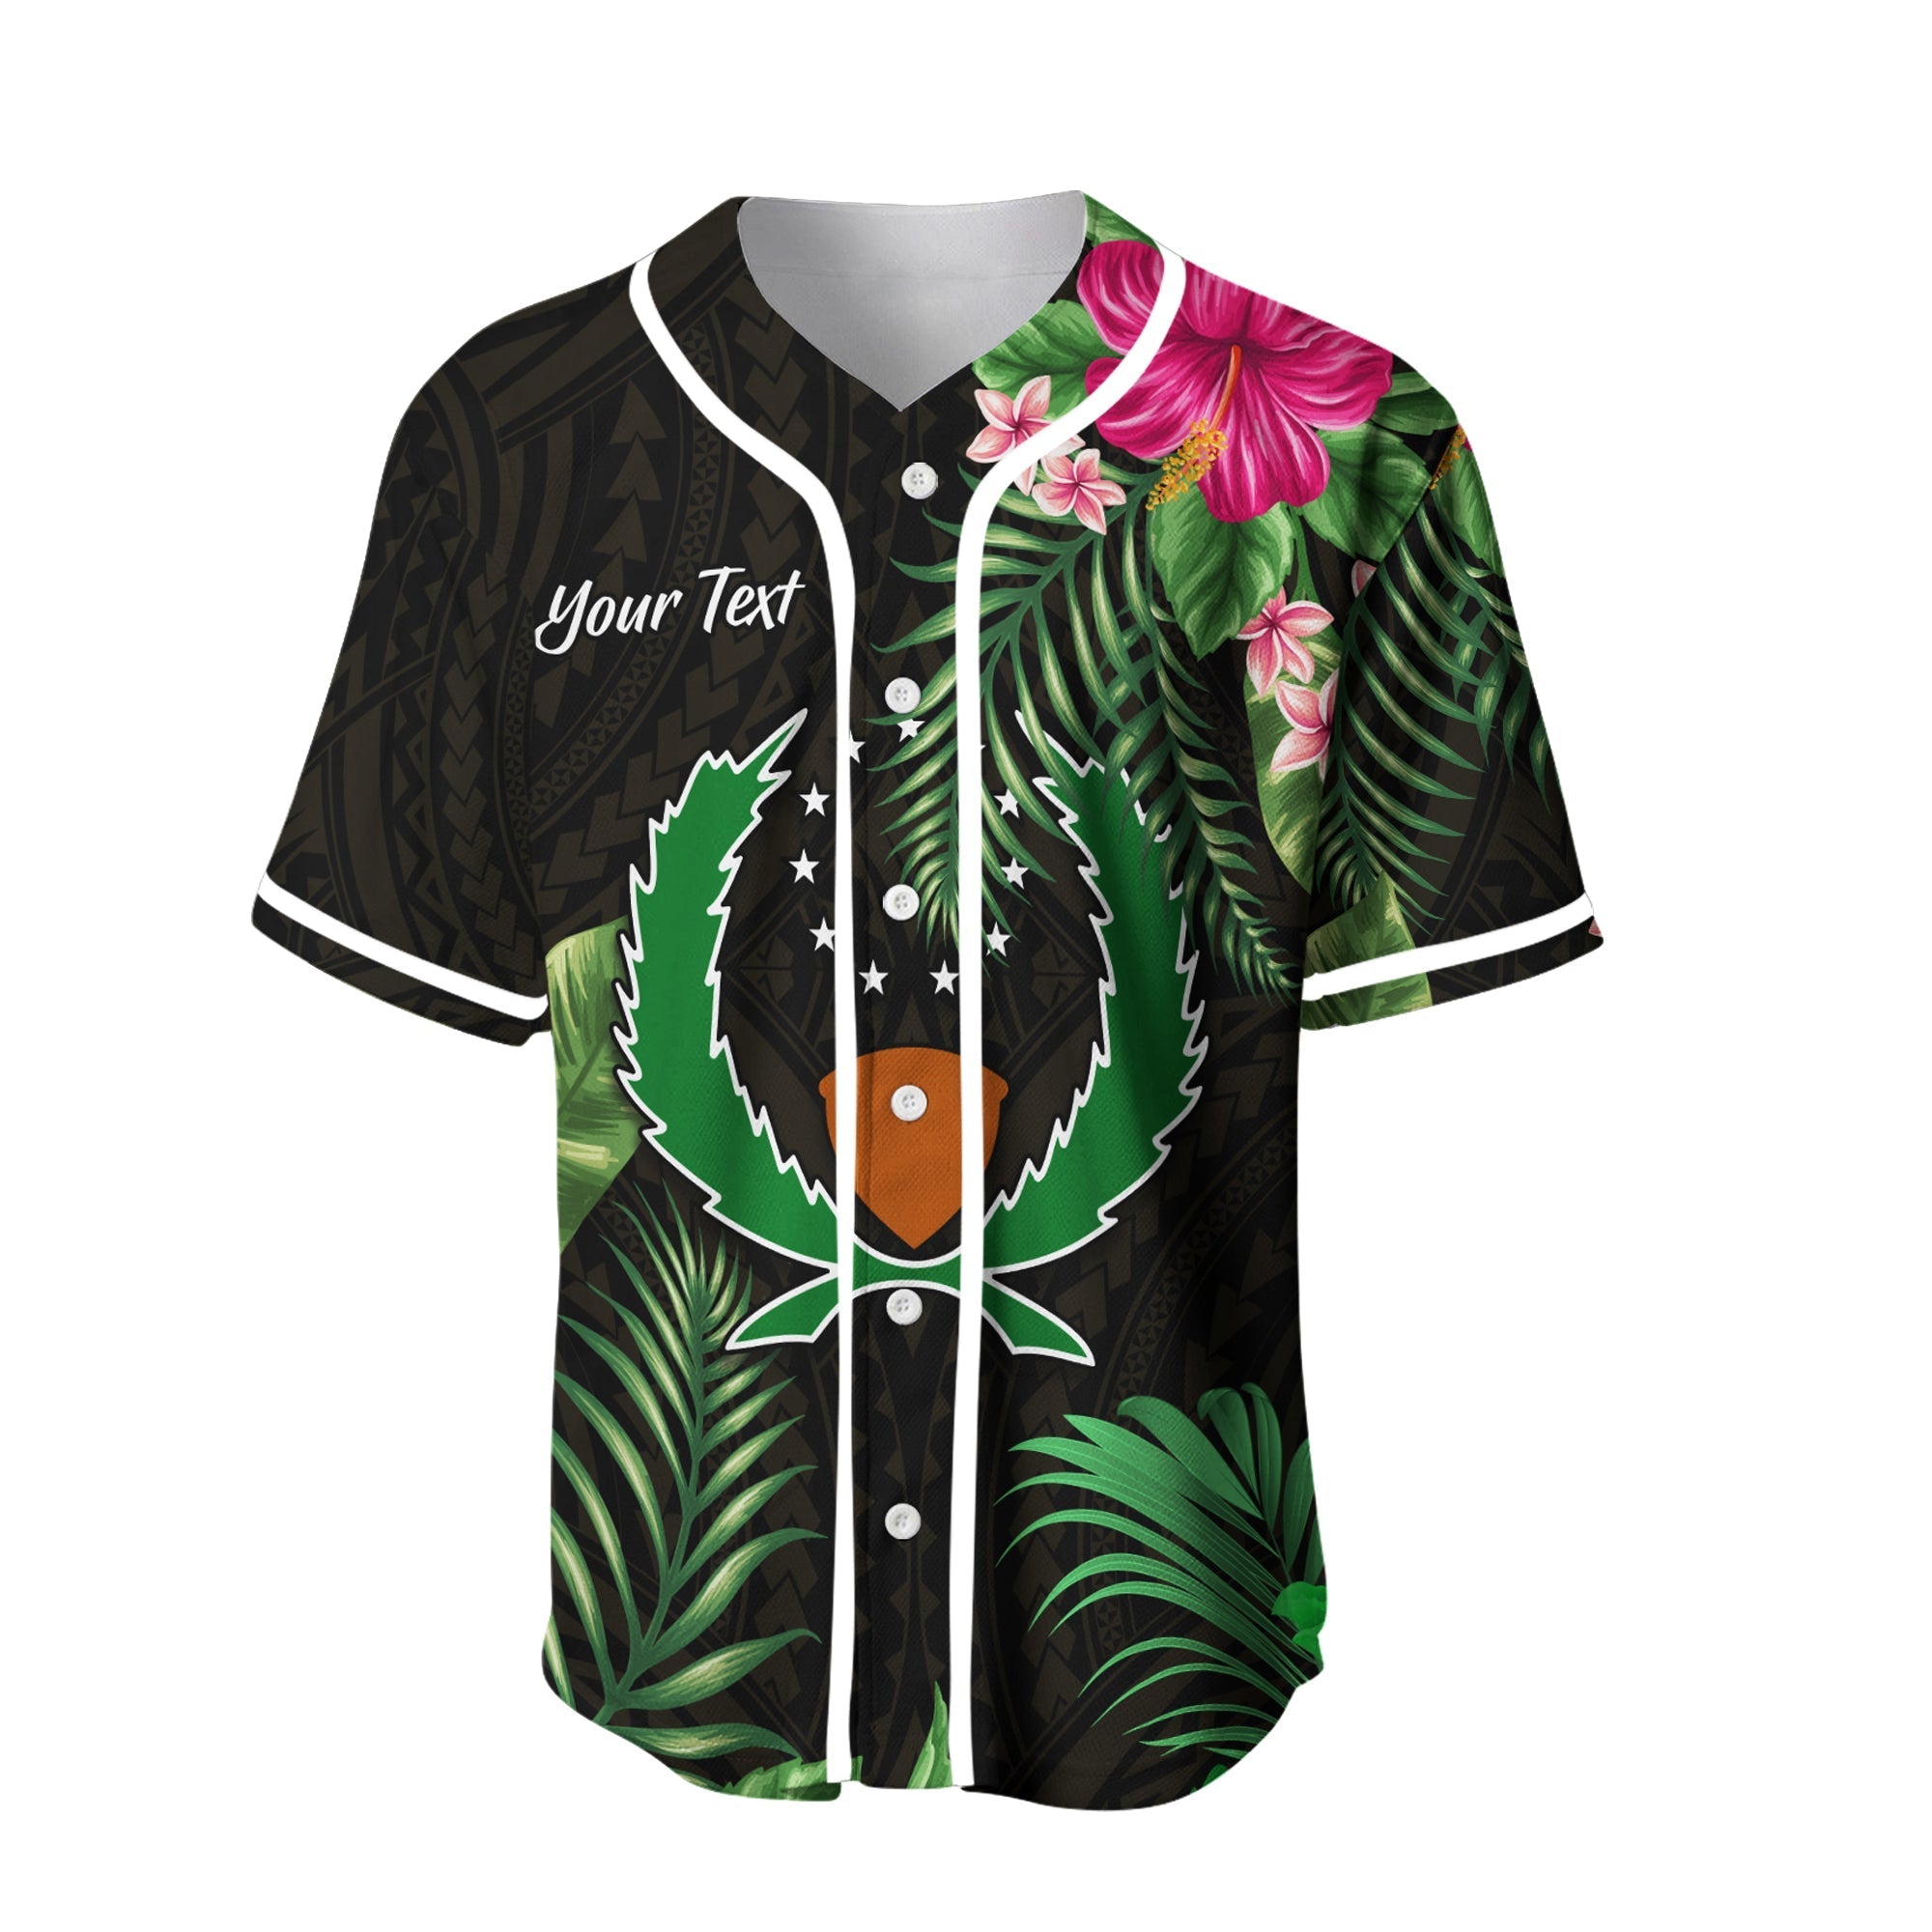 custom-personalised-pohnpei-micronesia-gold-baseball-jersey-tropical-flowers-version-02